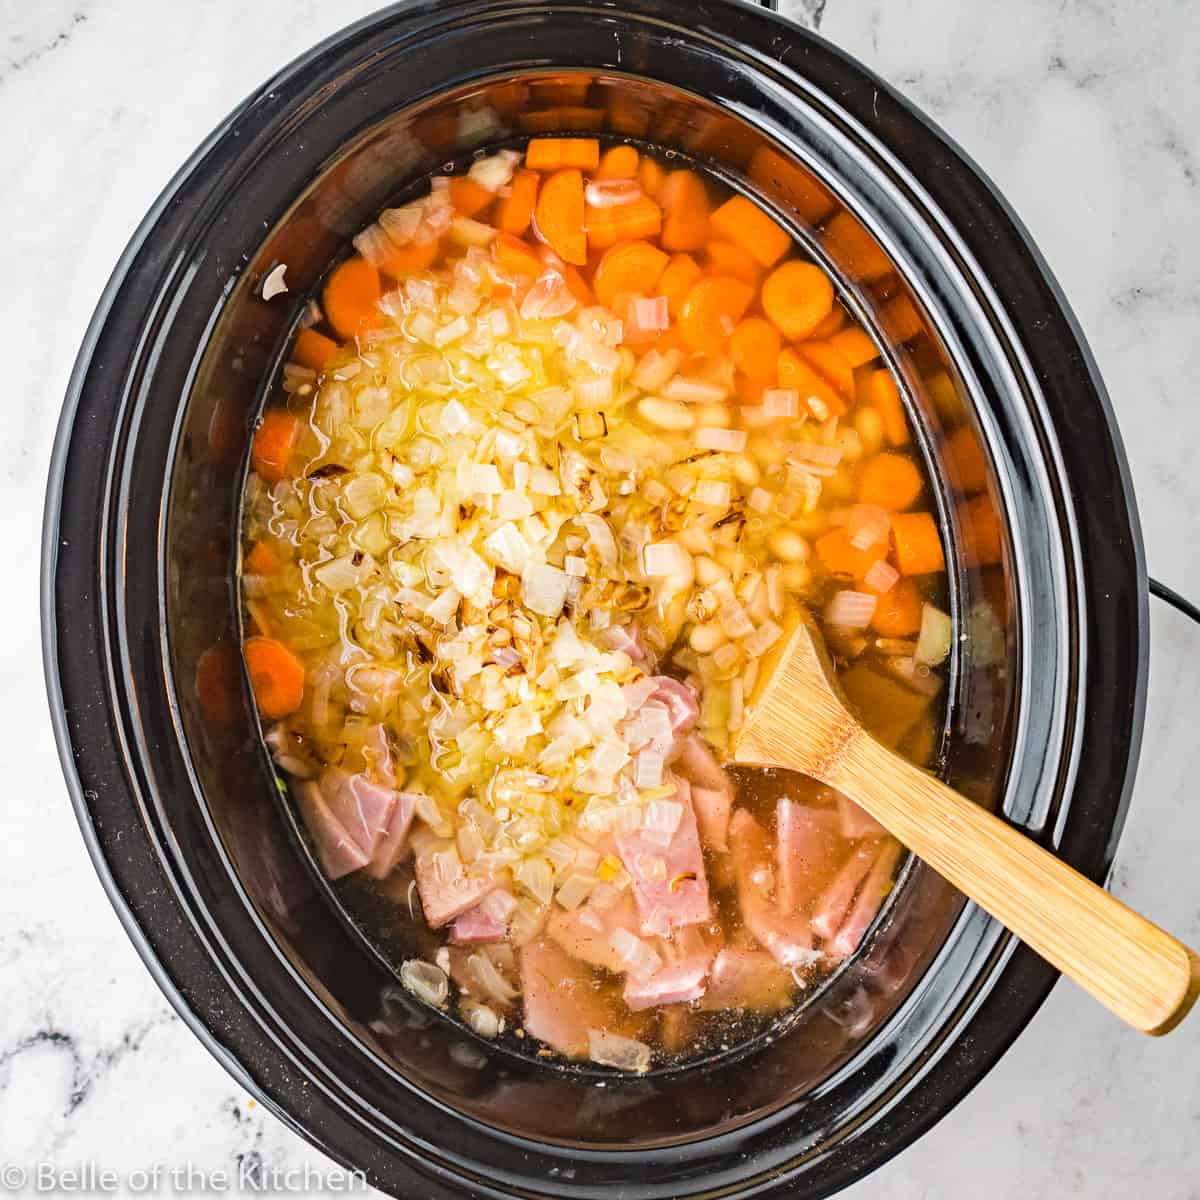 a crockpot filled with carrots, onions, beans, and ham, and a wooden spoon